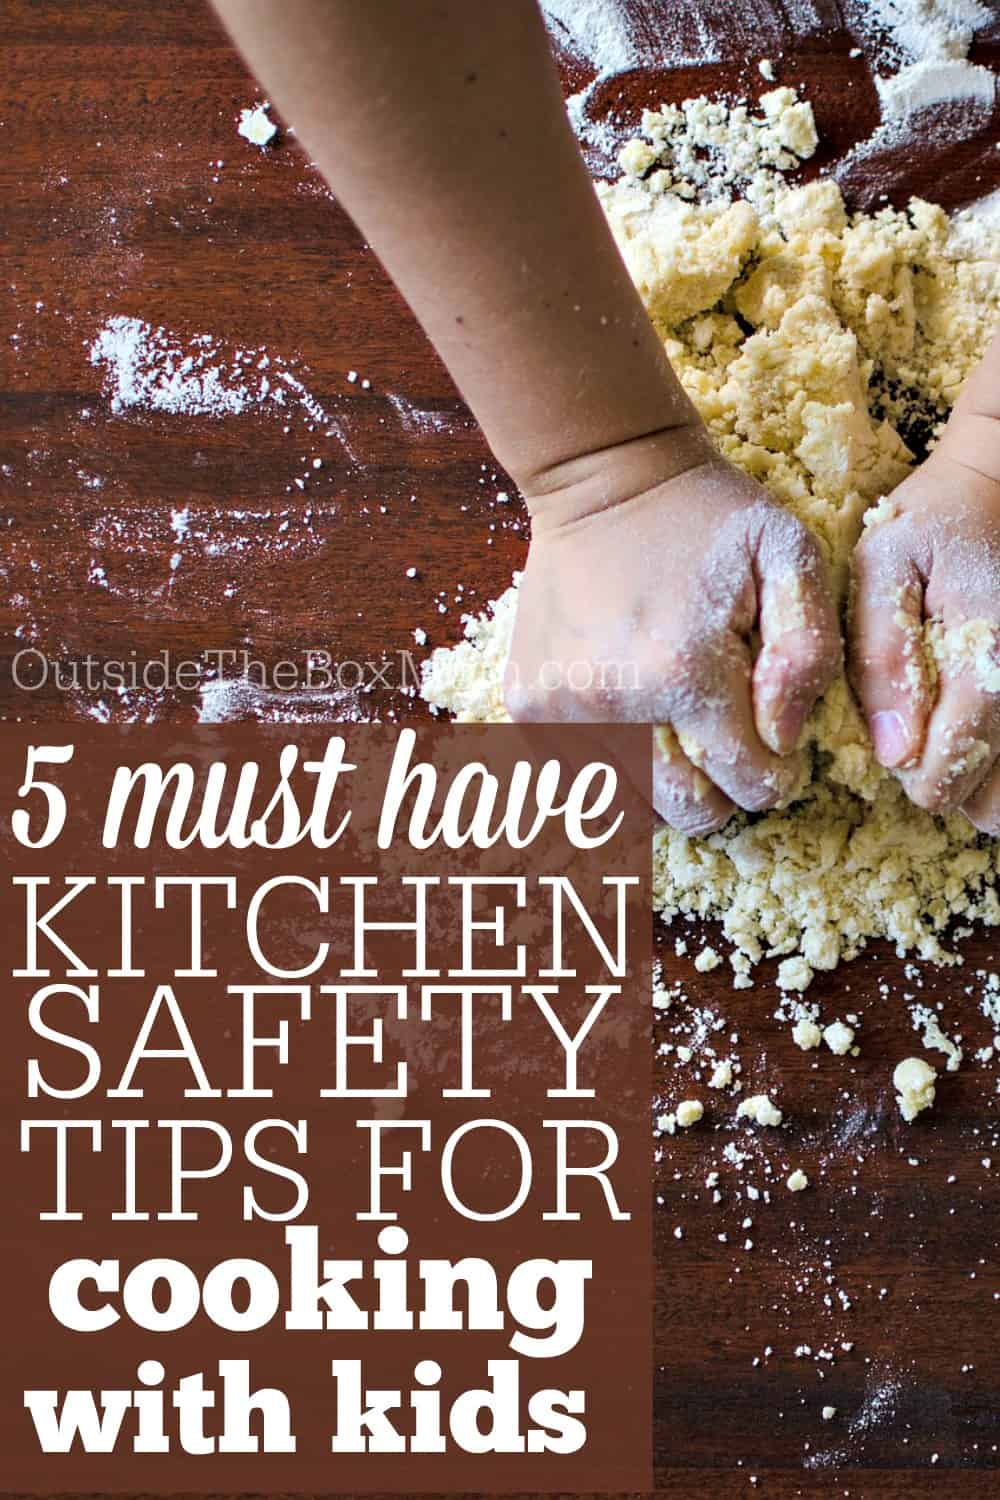 Cooking is like a big experiment for kids, who tend to be more playful than cautious. Therefore, it’s up to us adults to keep the “laboratory” safe. Here are give must have kitchen safety tips for cooking with kids.